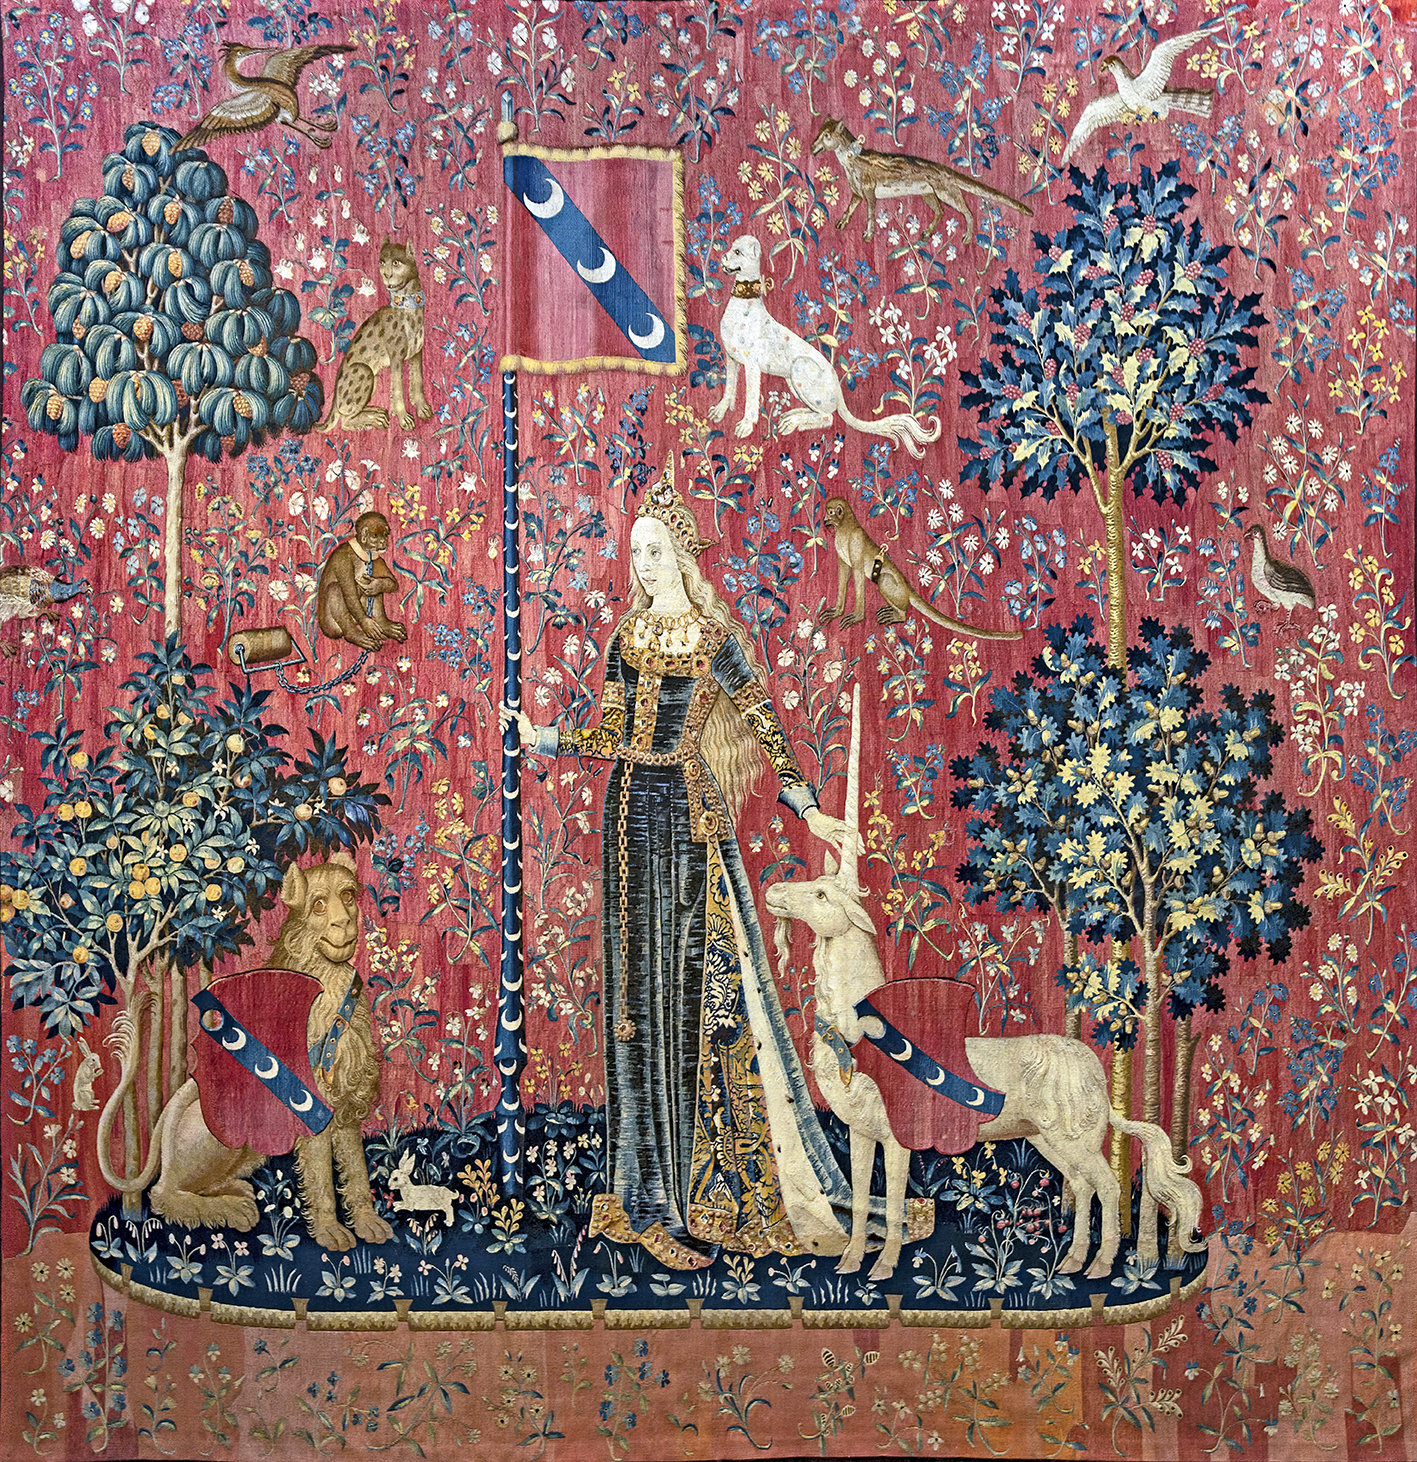 At the center, there is a noblewoman standing, perhaps representing the sense of touch, which is a common theme in this series. She is dressed in an elaborate gown adorned with intricate patterns and floral motifs, indicating a high status. The dress is form-fitting at the top and flares out at the bottom, typical of medieval fashion, and she wears a headdress that also signifies nobility.